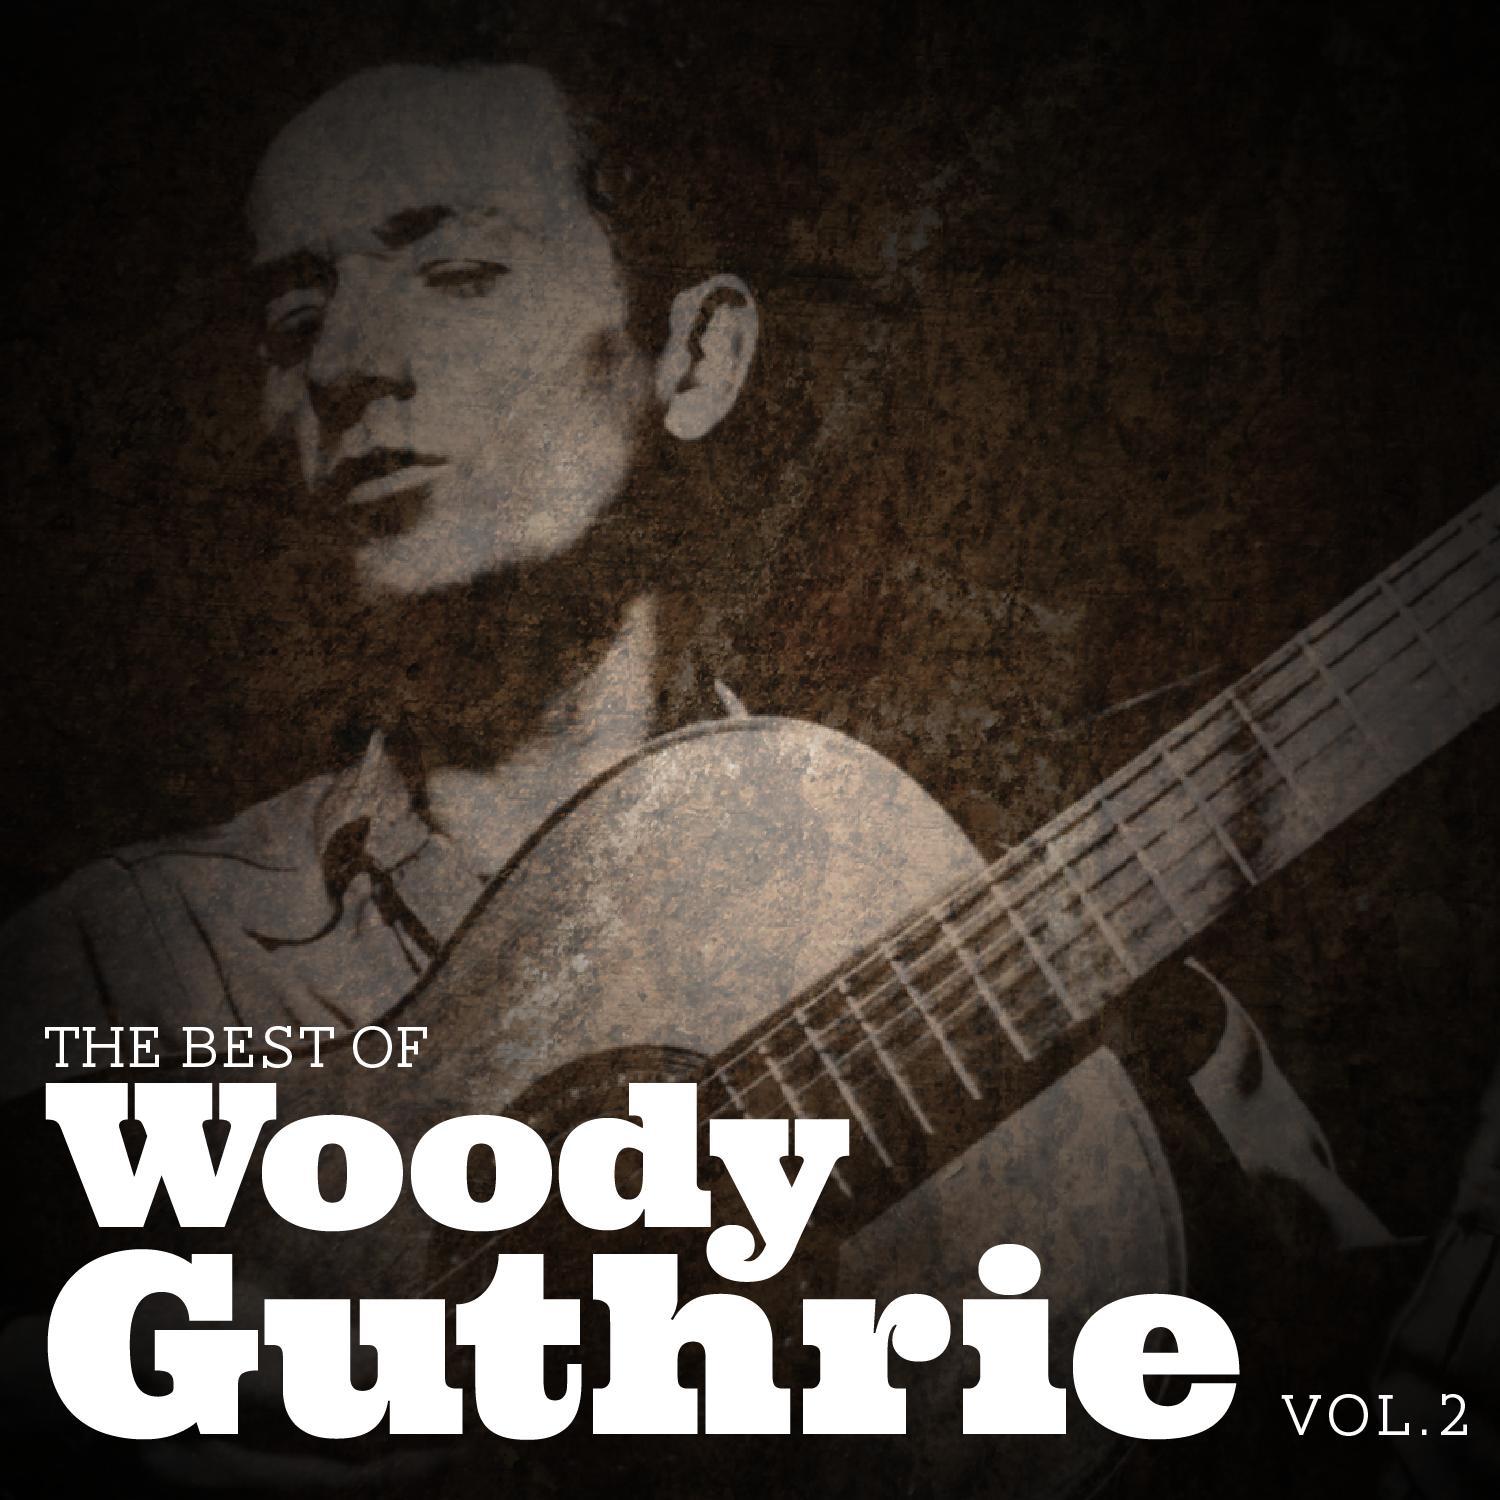 I Ain't got no Home Woody Guthrie